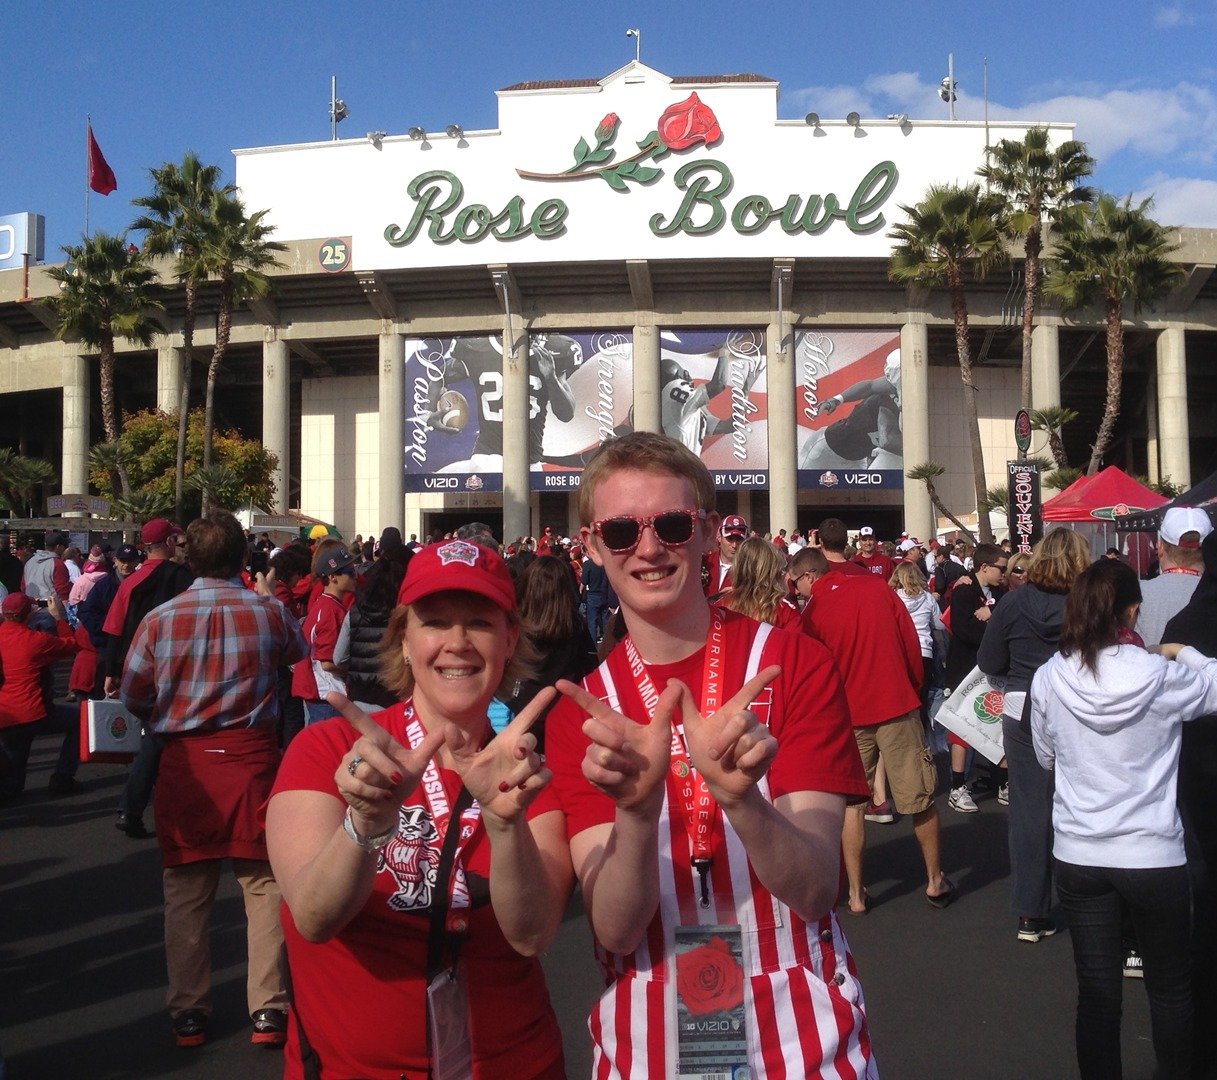 Wisconsin Badger fans at the Rose Bowl